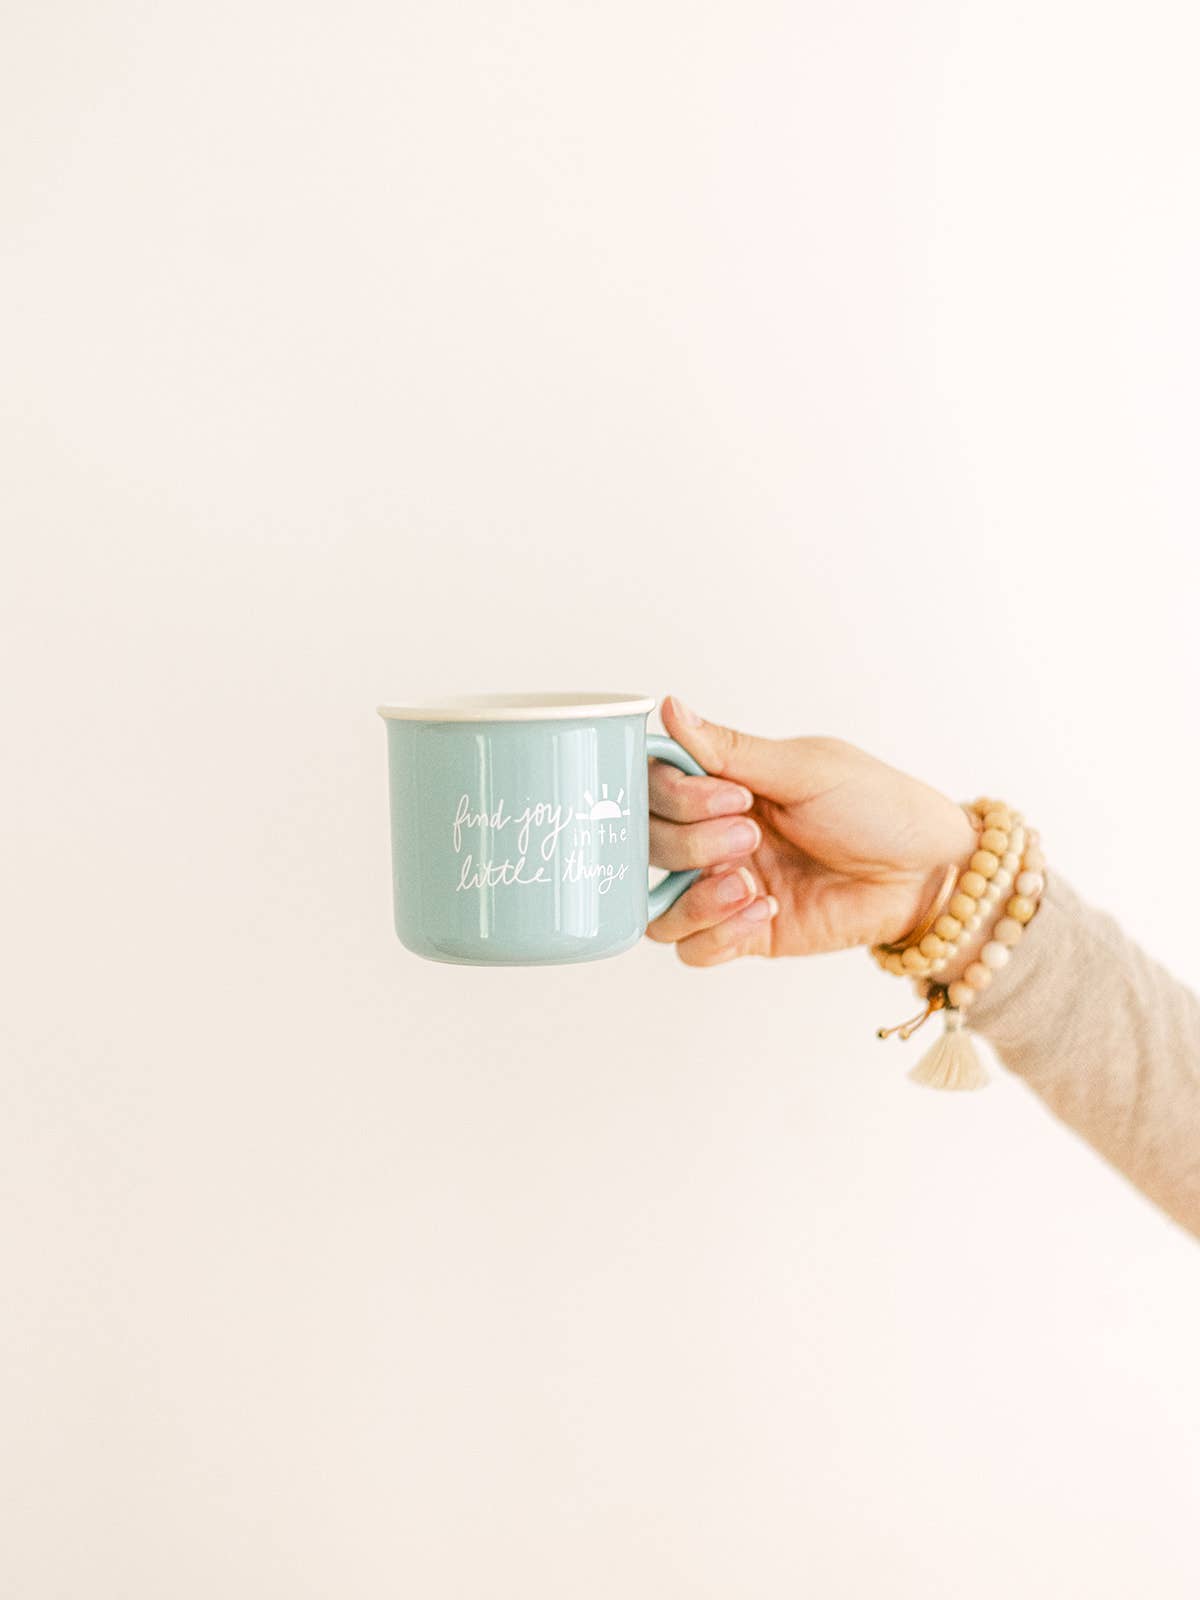 Find Joy in the Little Things Spring Mug